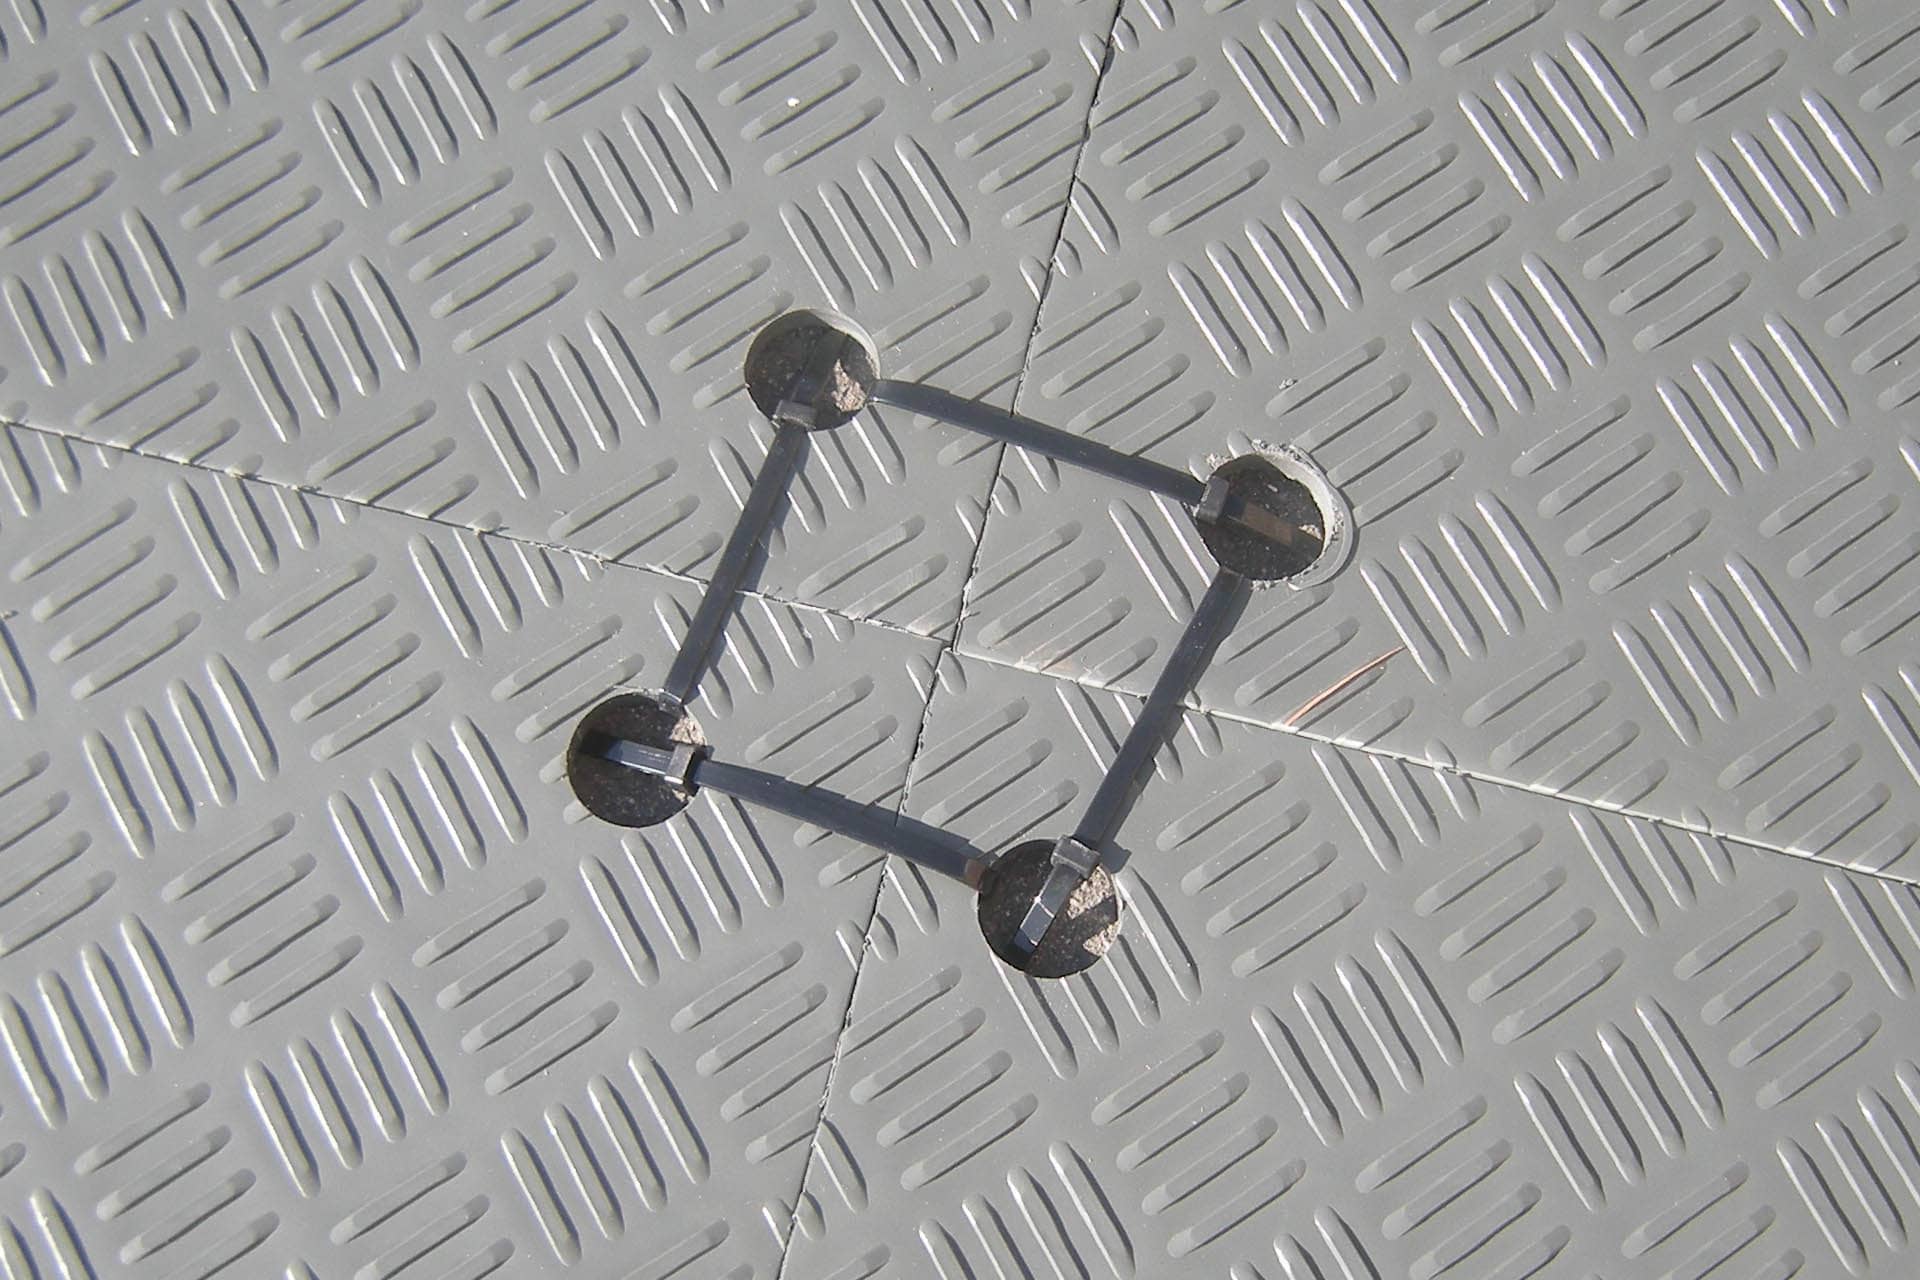 Duramatt Lite ground protection mats with cable tie connections